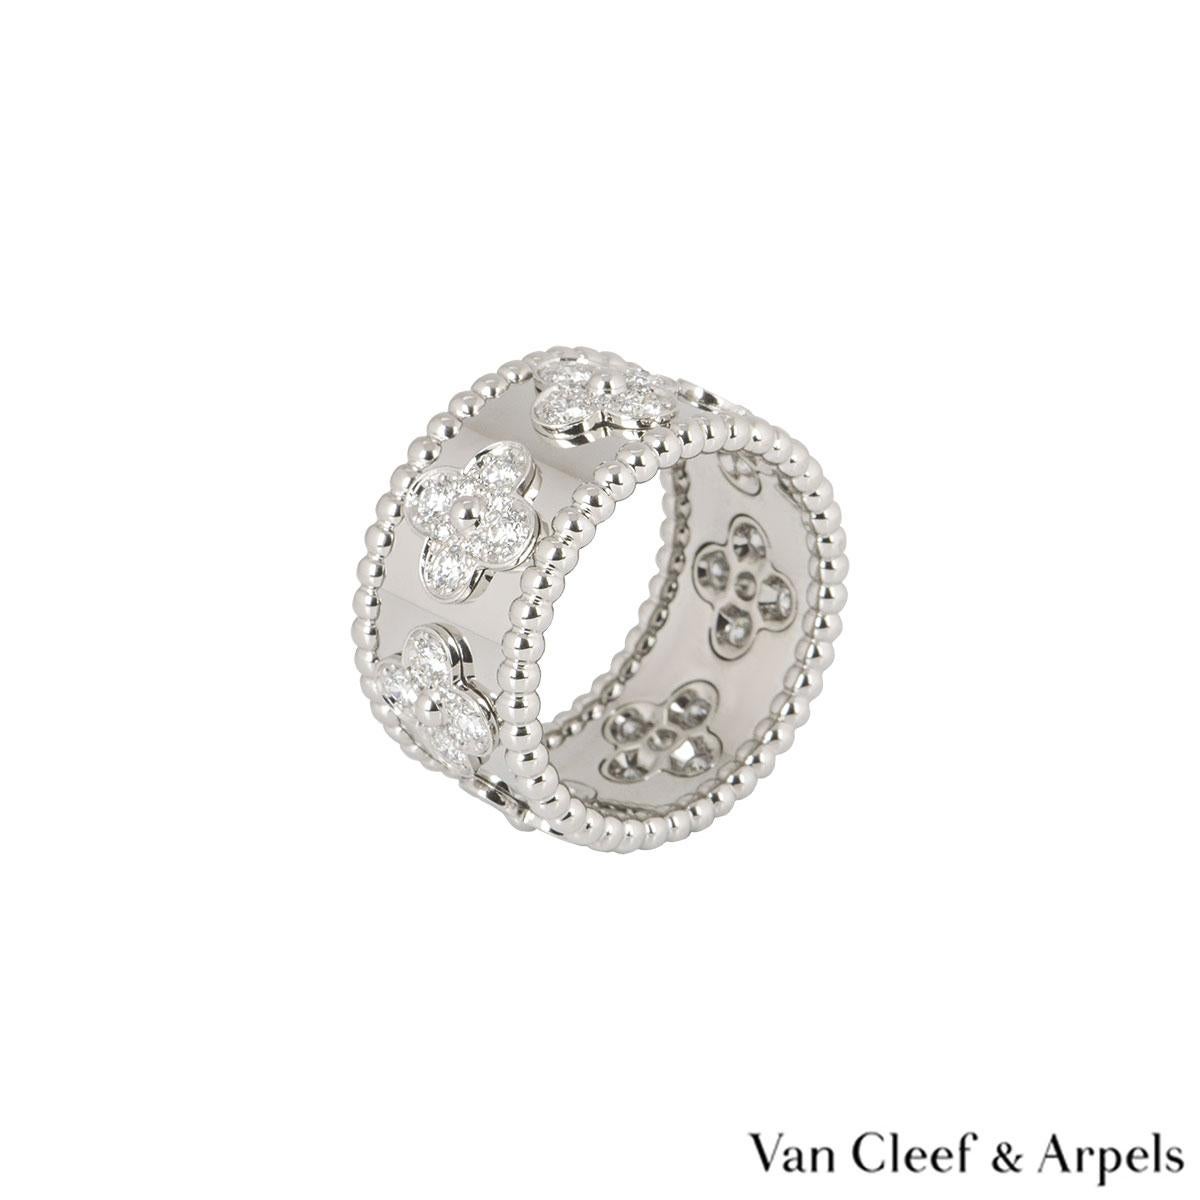 A beautiful 18k white gold ring by Van Cleef & Arpels from the Perlée Clovers collection. The ring features 7 four leaf clover motifs, each set with 8 round brilliant cut diamonds. There are a total of 56 diamonds totalling approximately 1.49ct. The